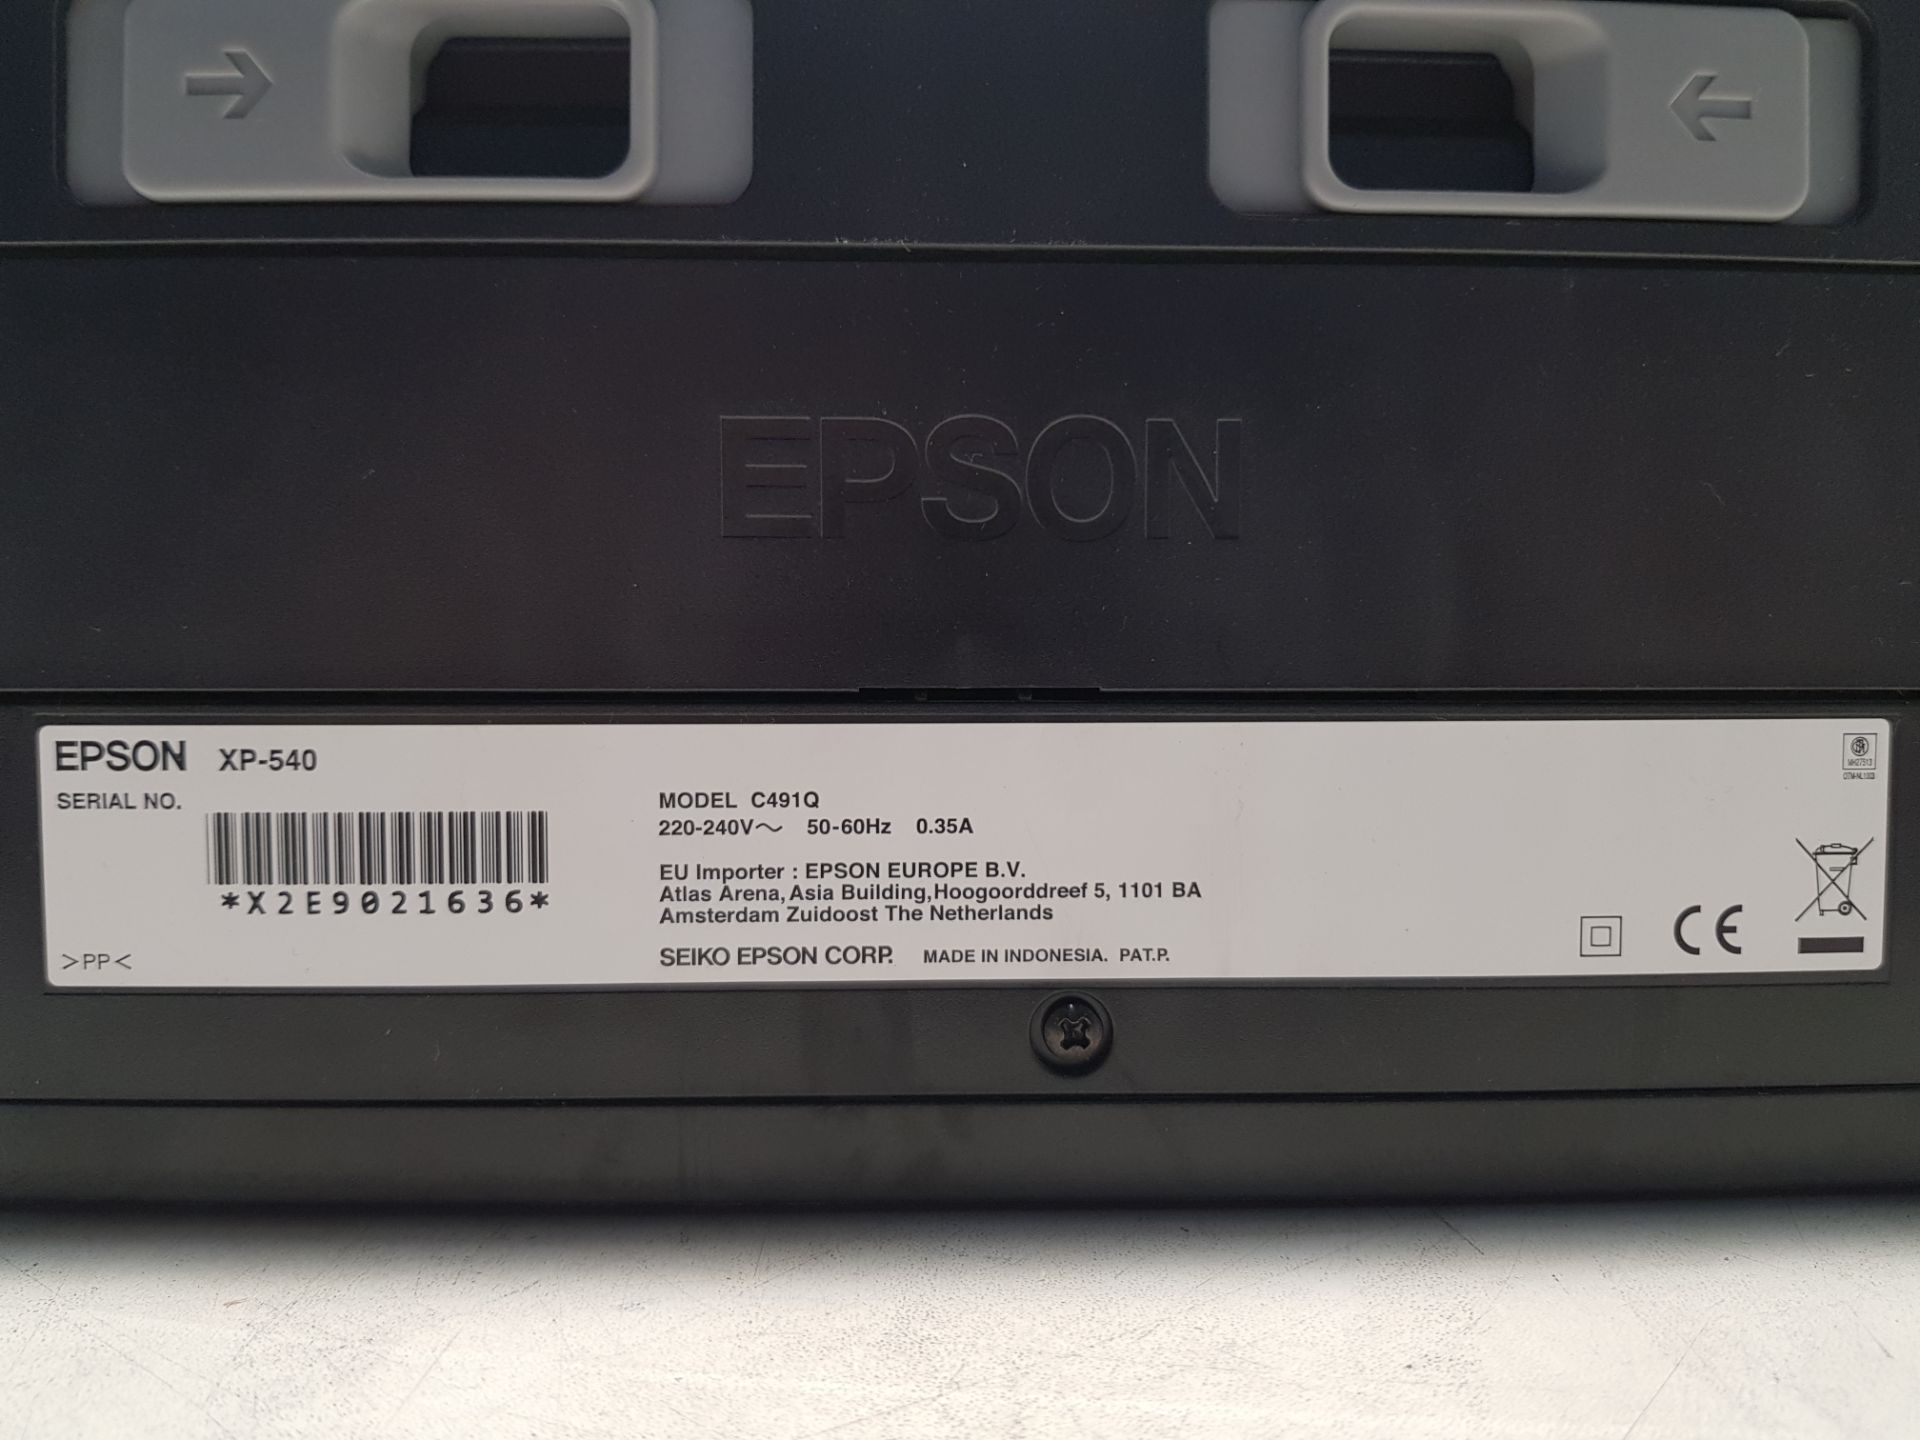 Epson XP-540 All in One Printer Model: C491Q S/N: X2E9021636 - Image 3 of 3